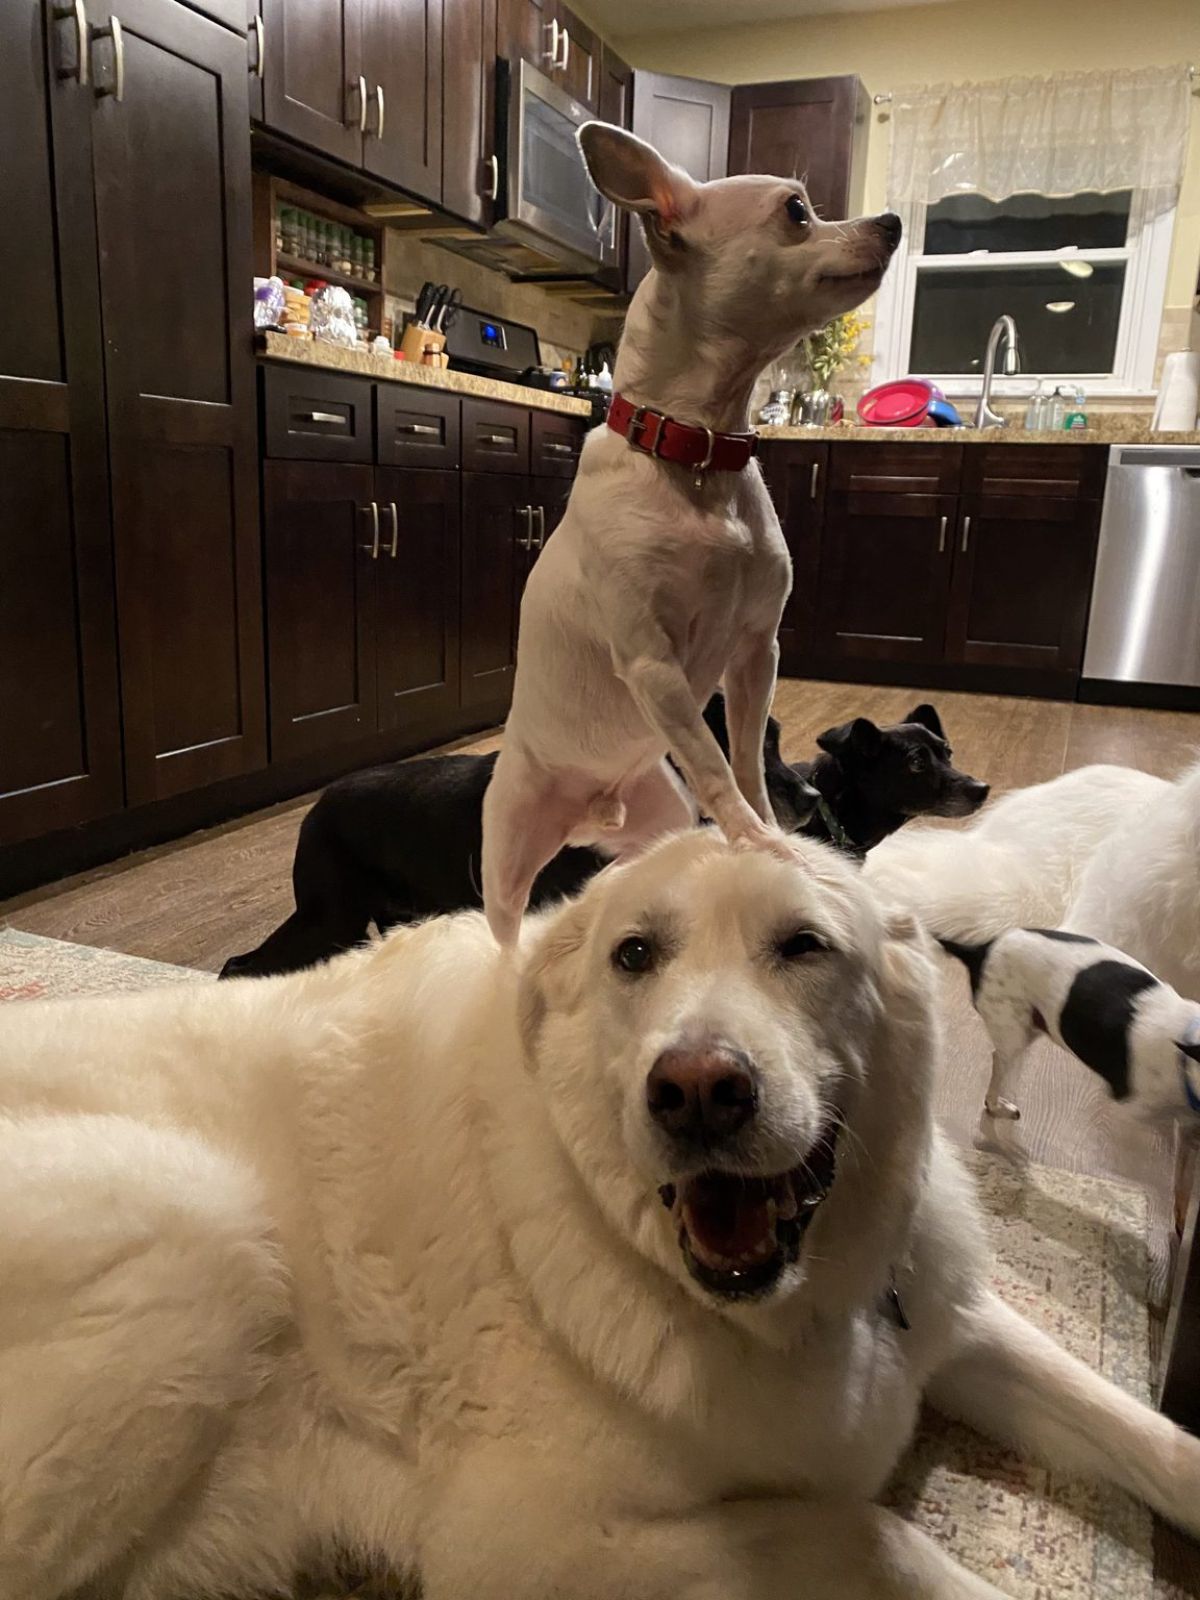 white chihuahua standing on the head of a fluffy white dog with 2 black dogs 1 white dog and 1 black and white dog behind them